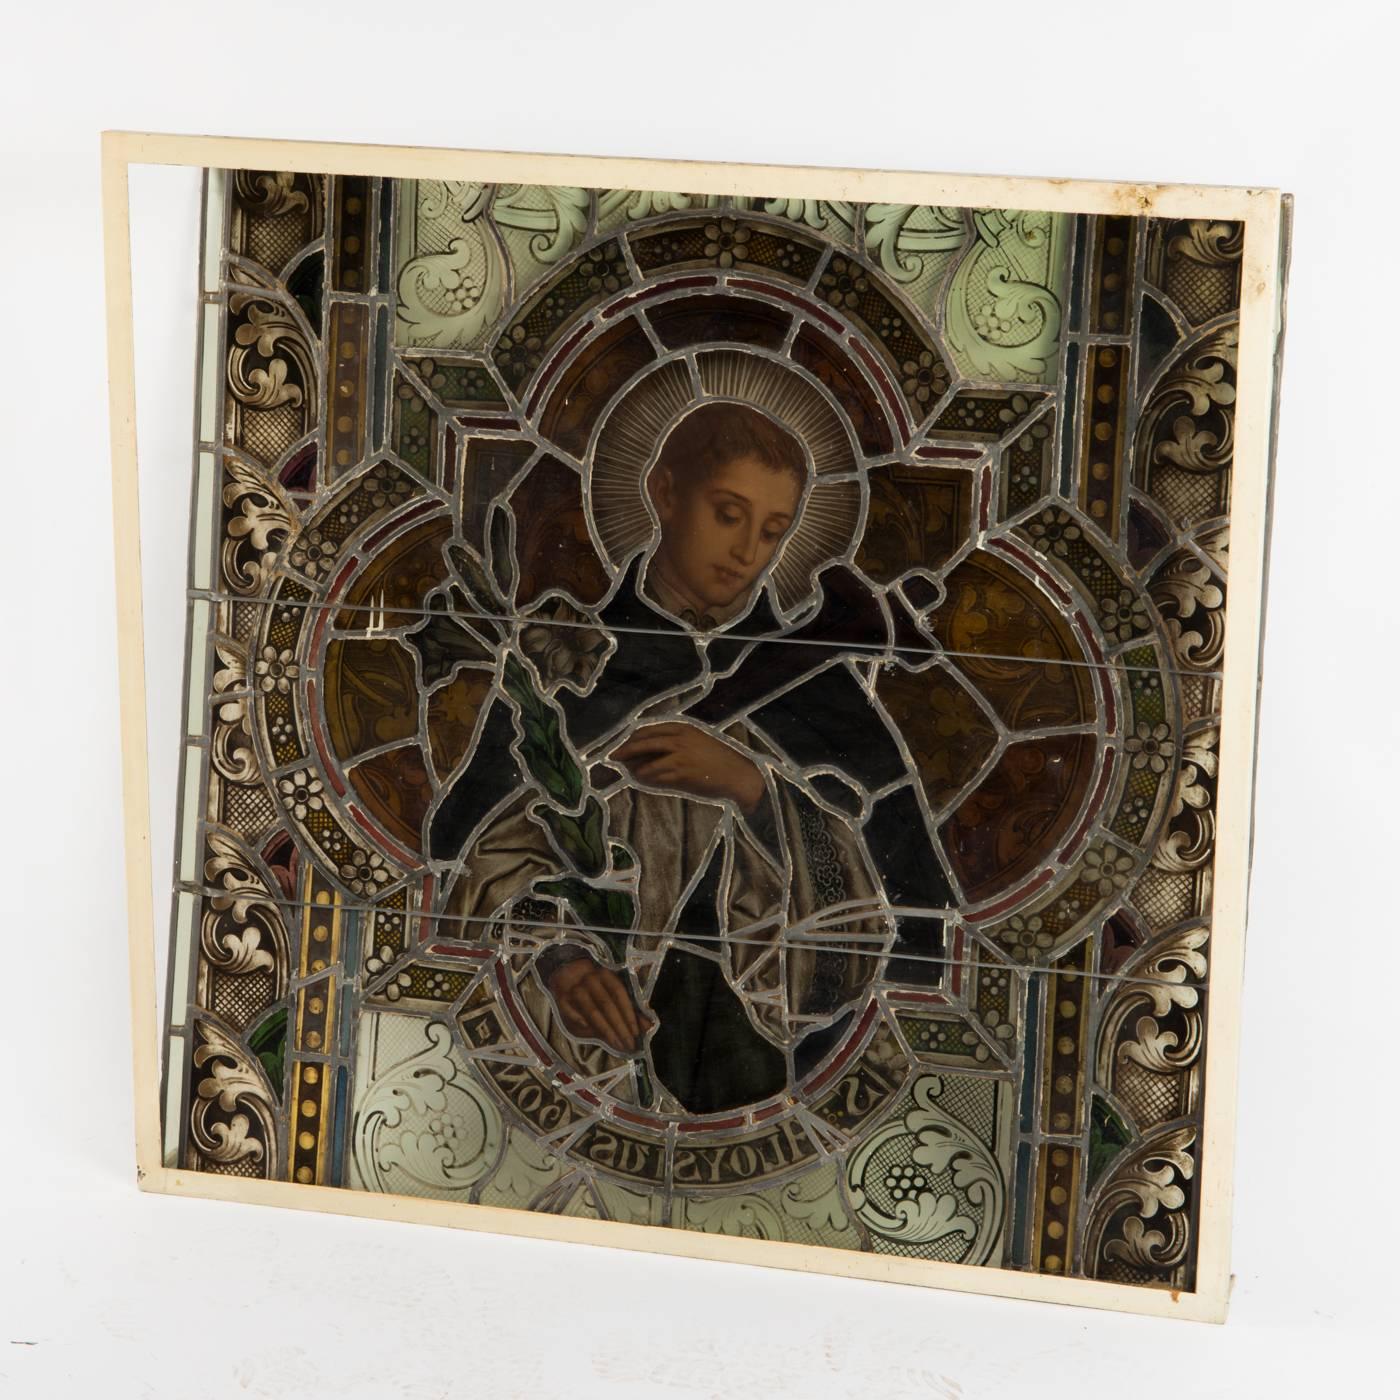 Hand-painted stained glass window from a German church probably form the early 20th century. It shows holy Aloisius from Gonzaga with a cros and a lily. The dimensions are 39" x 41".